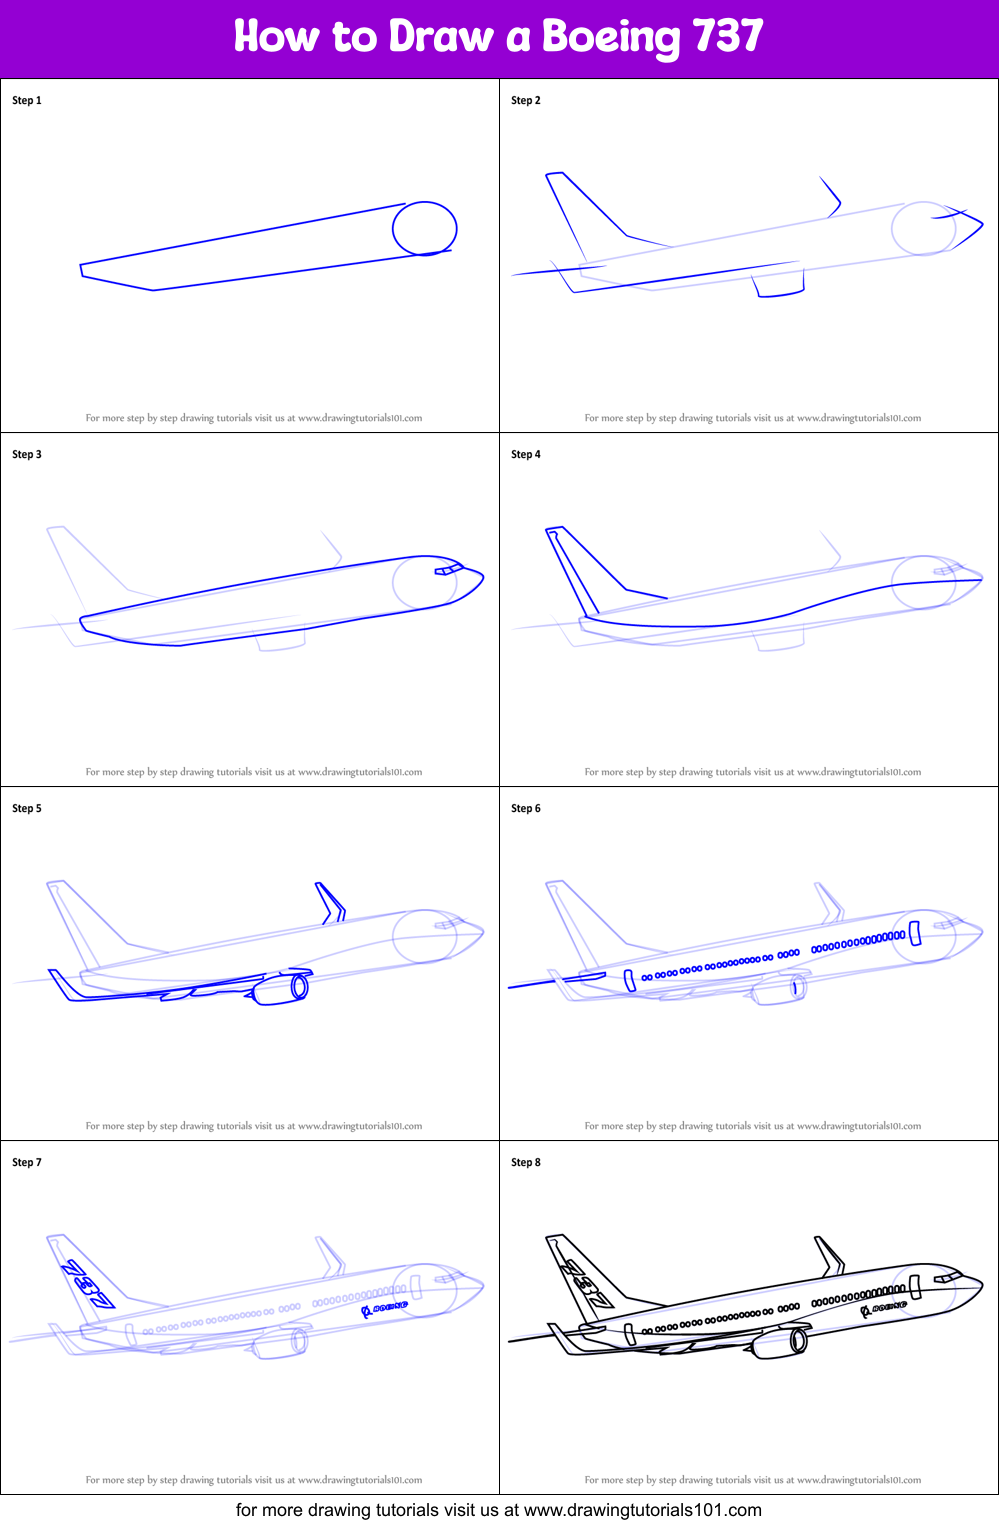 How to Draw a Boeing 737 printable step by step drawing sheet